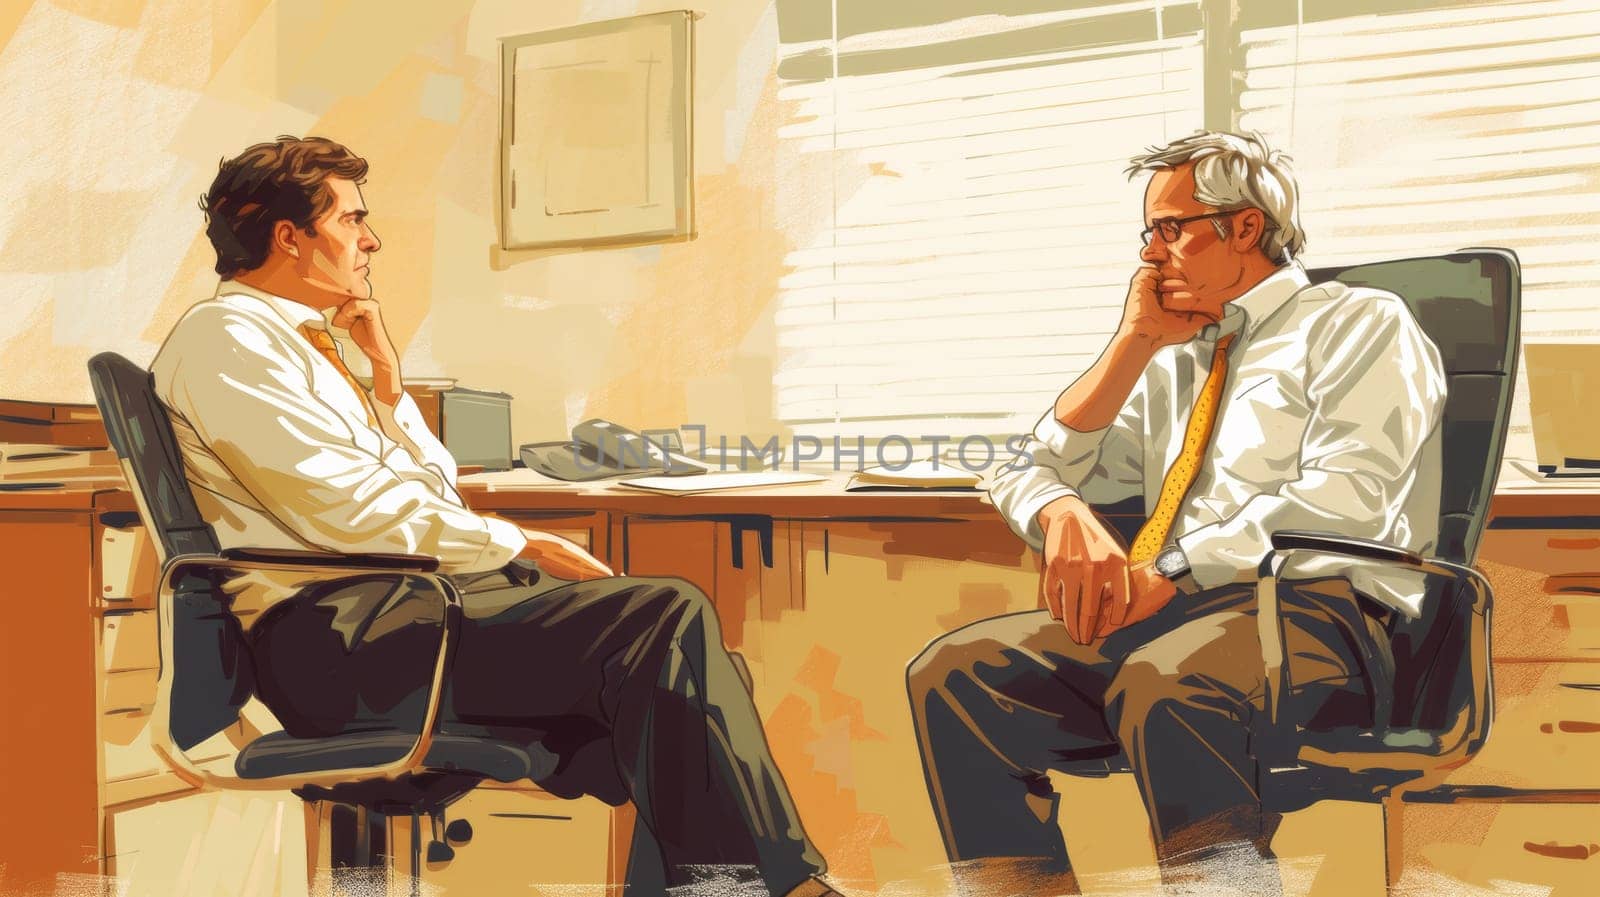 A painting of two men sitting in a chair talking to each other